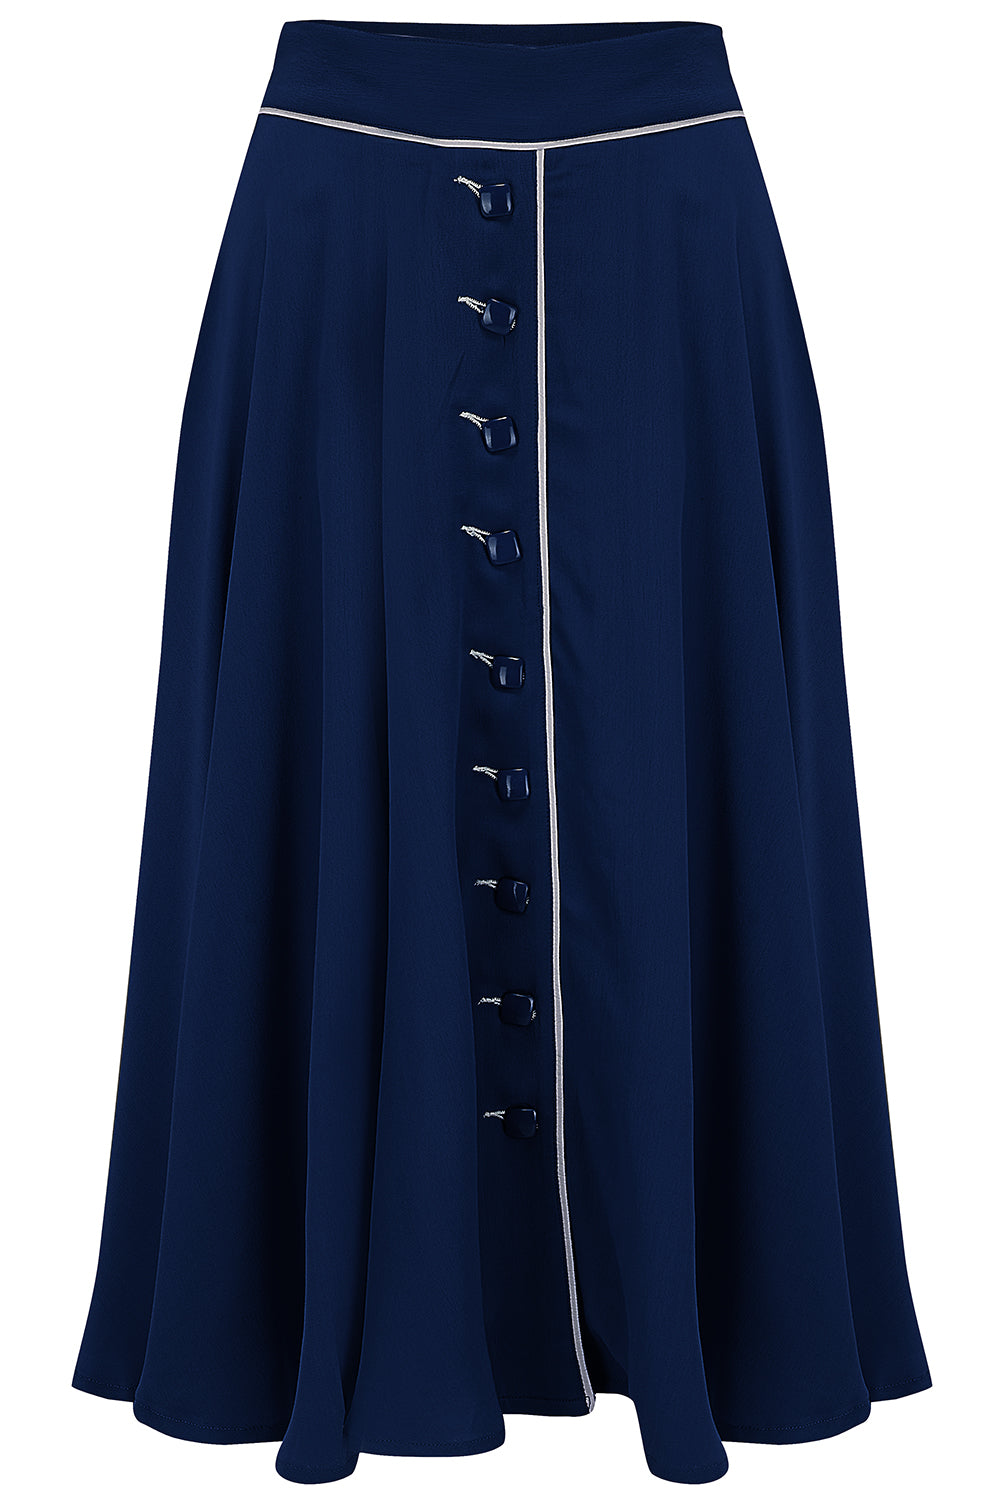 Agent Peggy Carter Costume, Dresses, Hats Rita Swing Skirt in Navy with Ivory Detailing Classic 1940s Style £49.00 AT vintagedancer.com